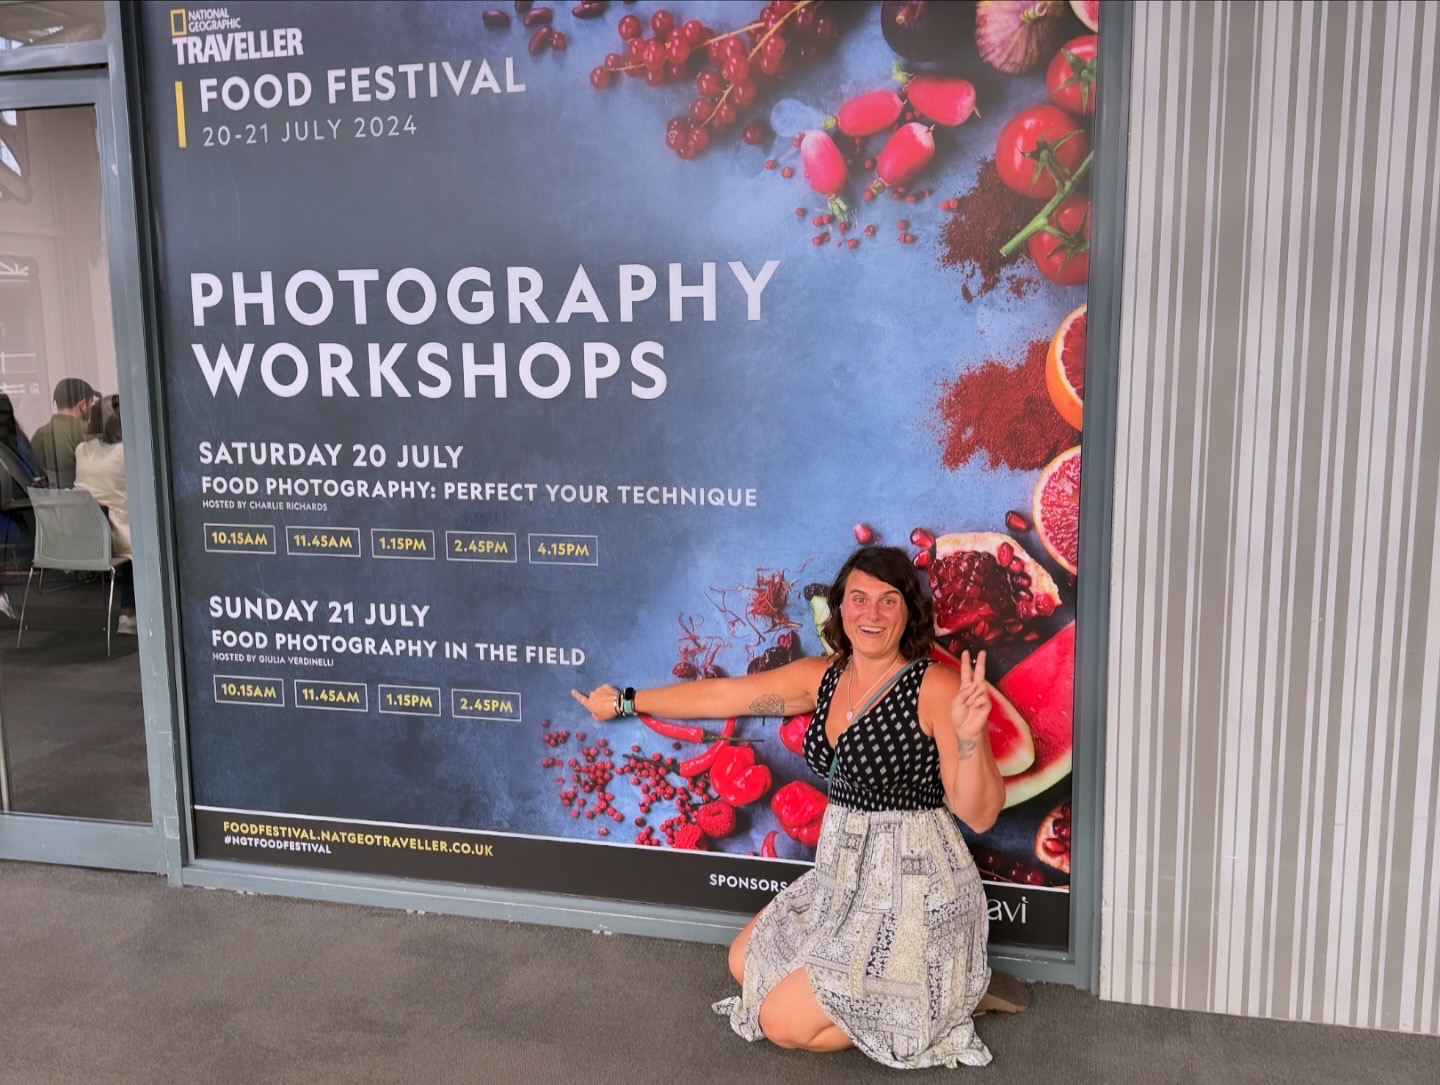 VIDEO: National Geographic Food Photography Workshop at the NatGeo Food Festival in London